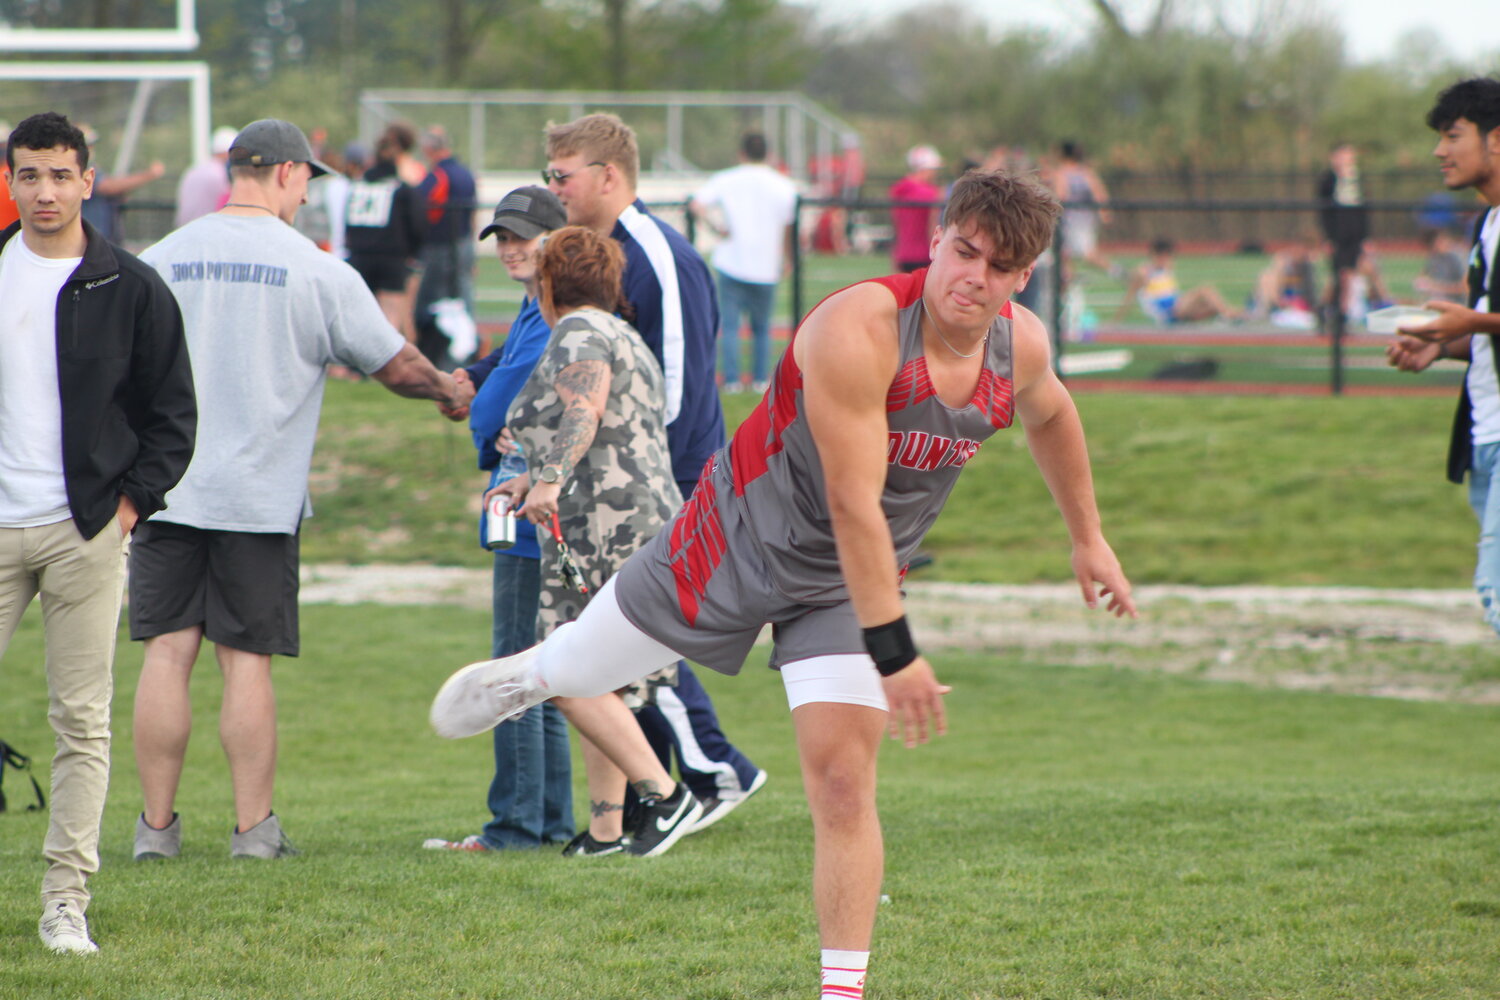 New to track this season Wyatt Woodall has still made an impact for Southmont. The junior was the county champion in the boys shot put.